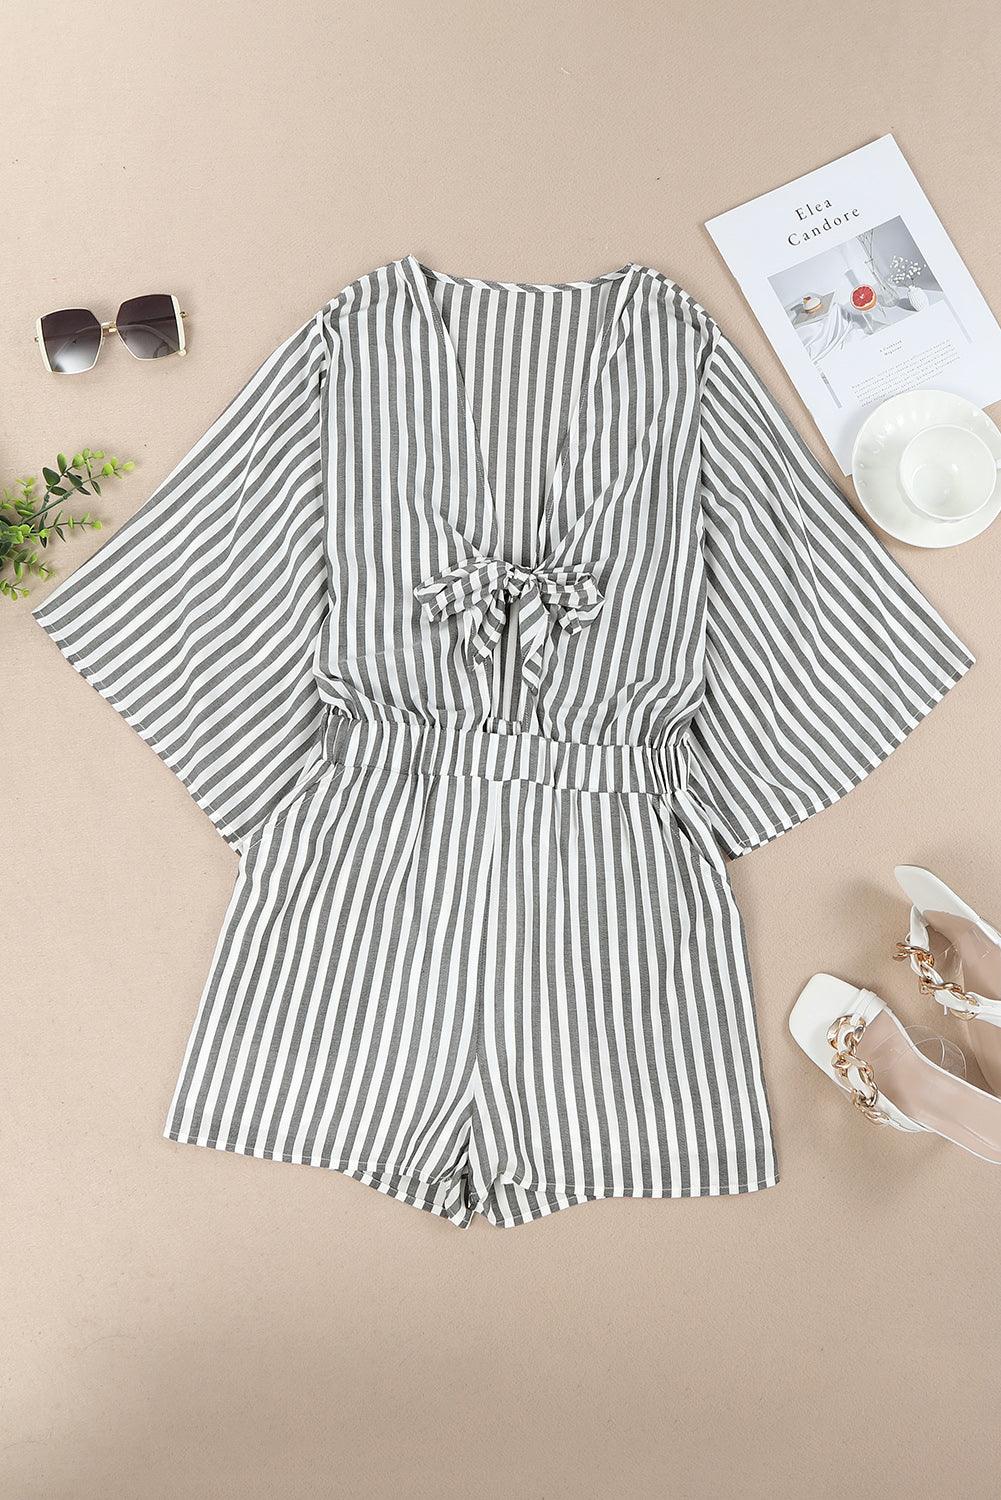 Grey Striped Print Tie Knot Front Romper With Pockets - Vesteeto